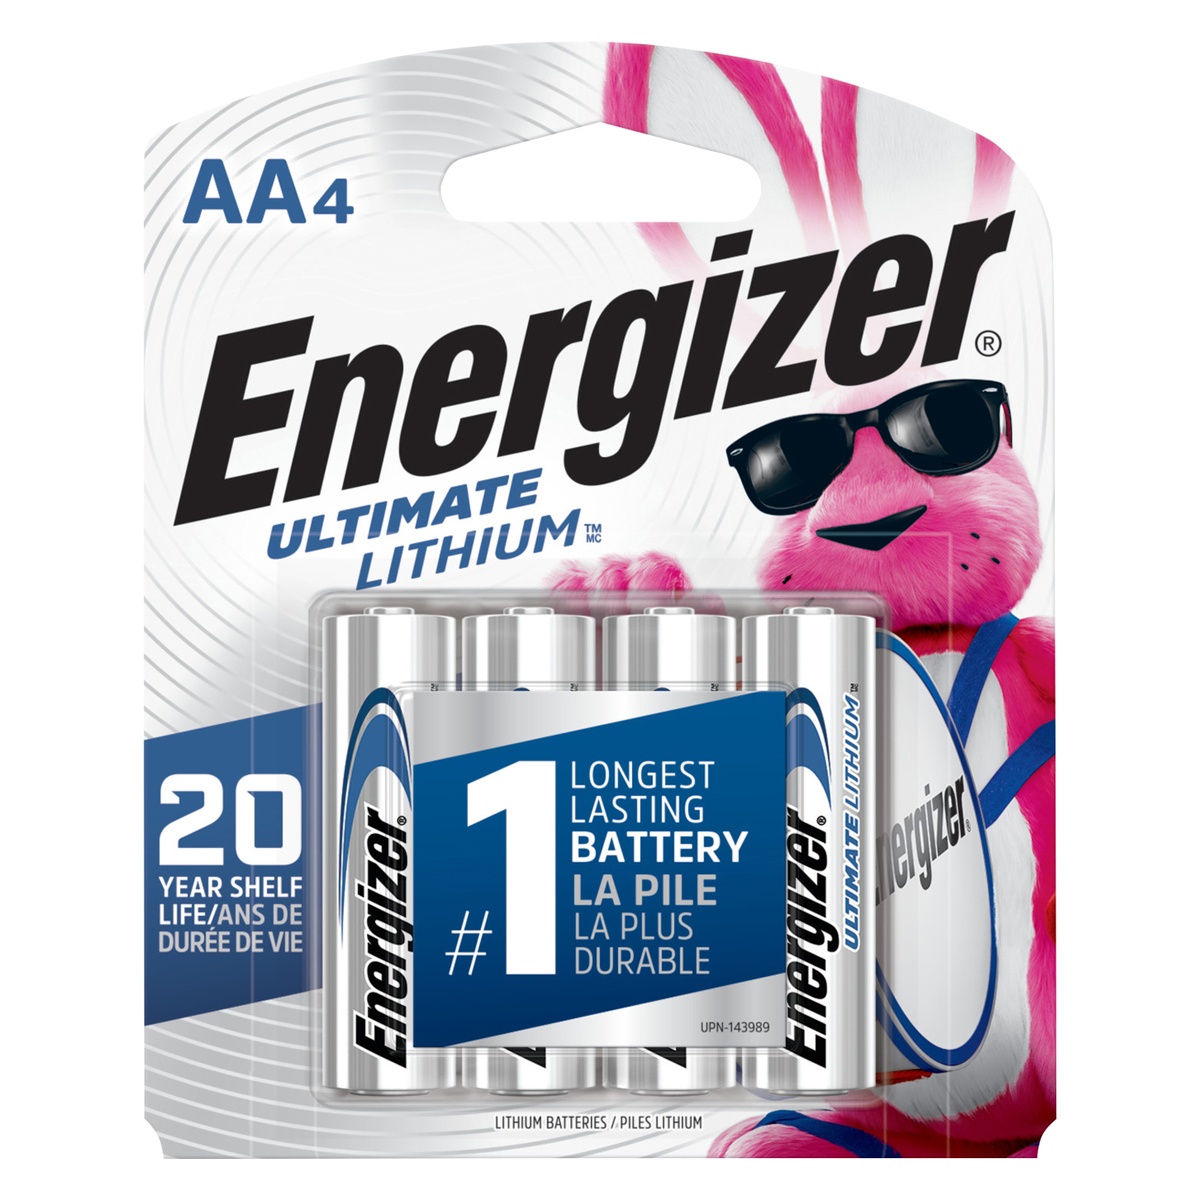 slide 4 of 4, Energizer Ultimate Lithium AA Batteries, 4 ct